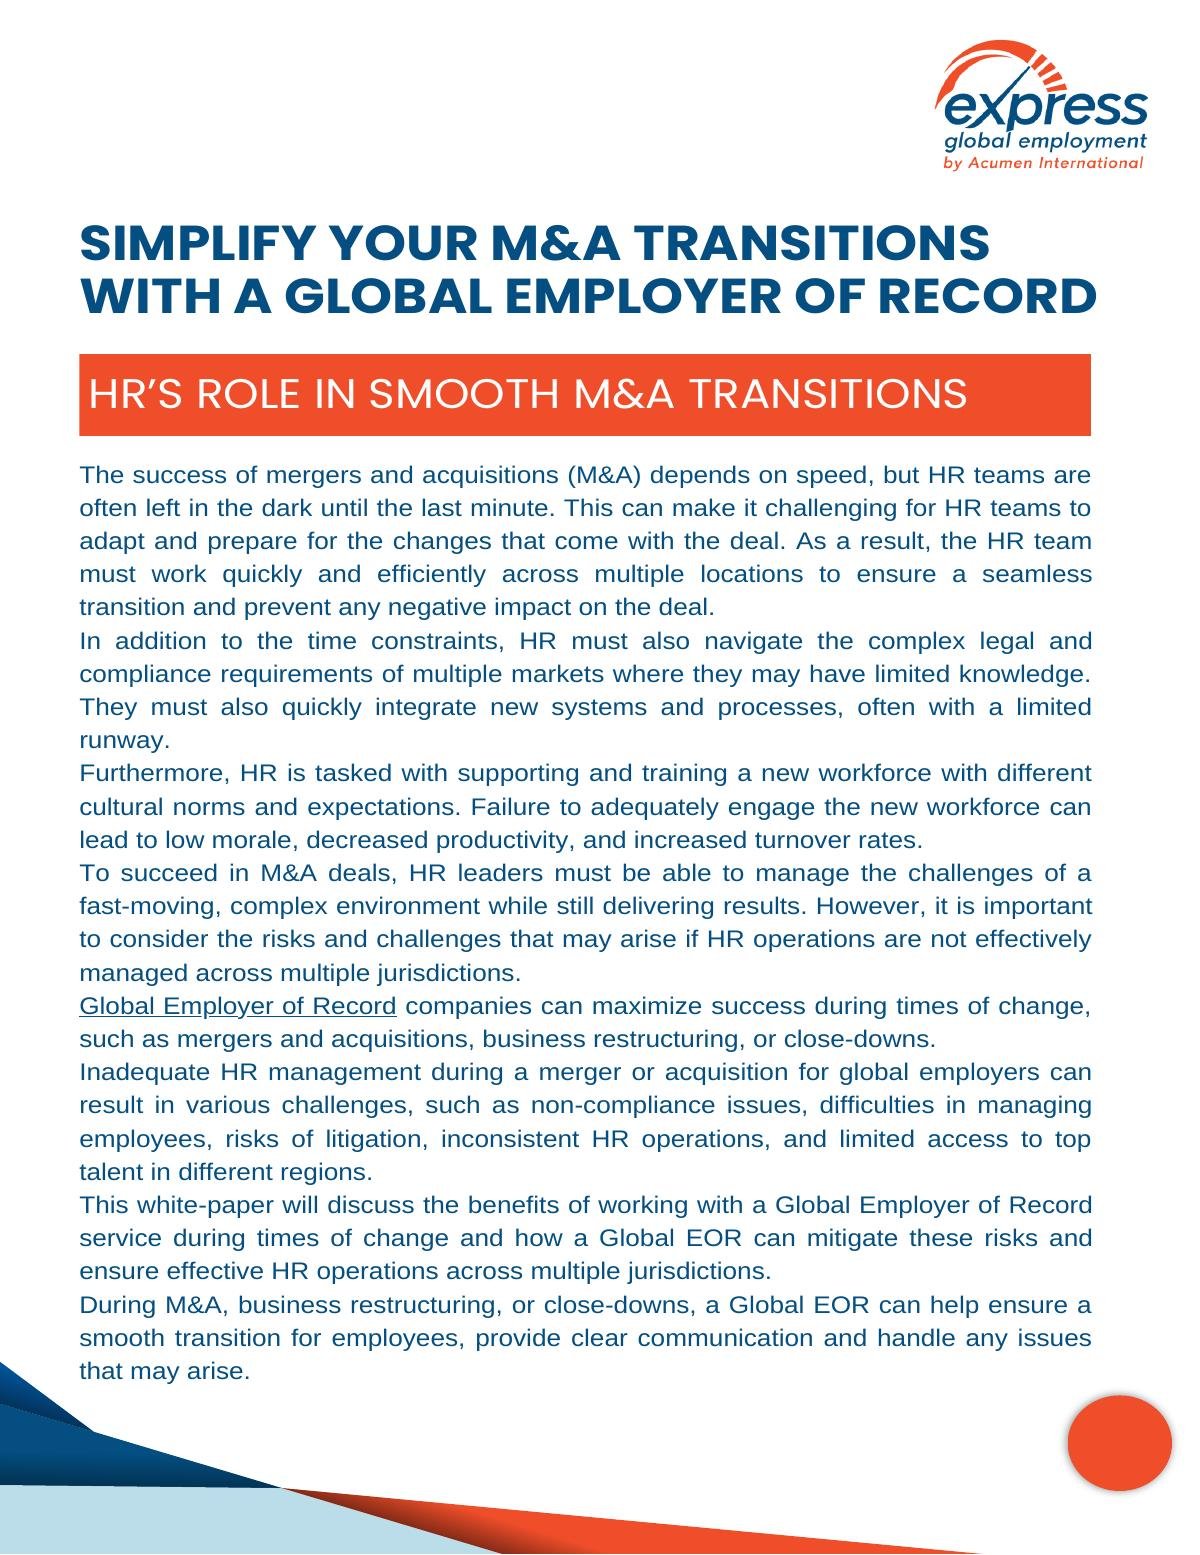 Simplify Your M&A Transitions with a Global Employer of Record